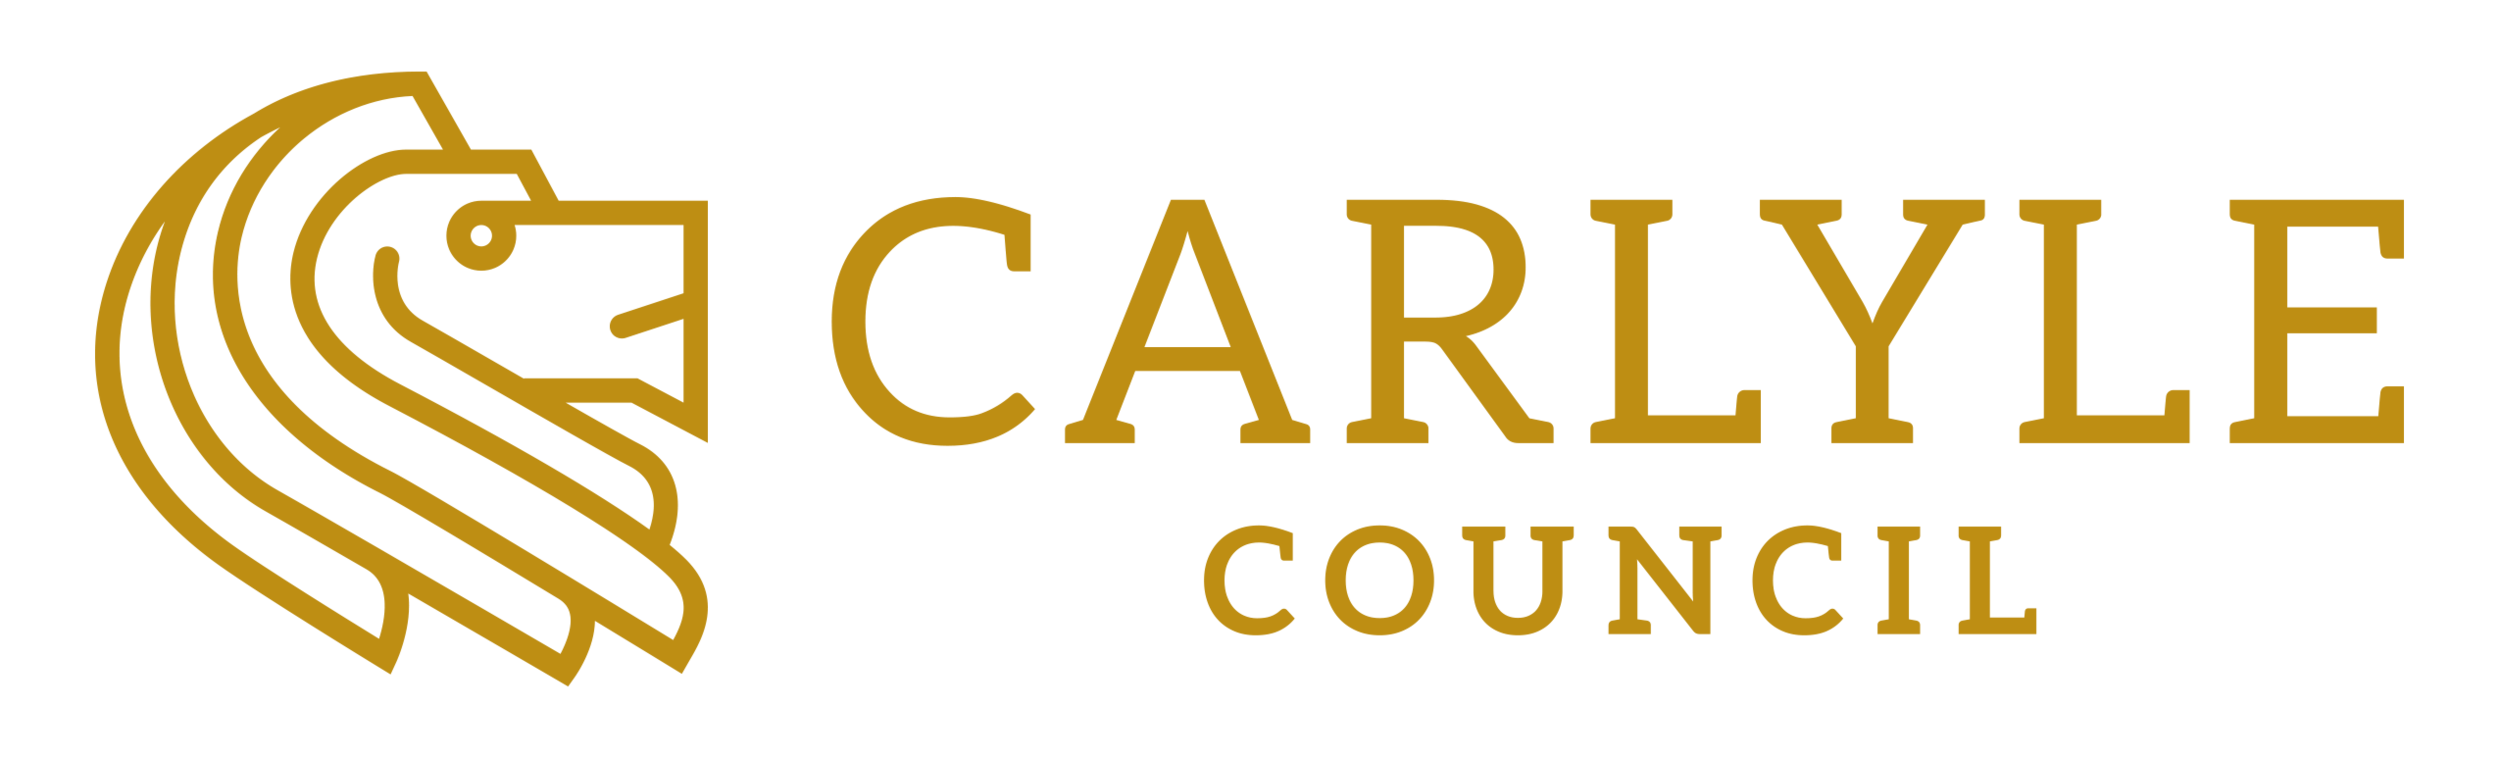 The Carlyle Council